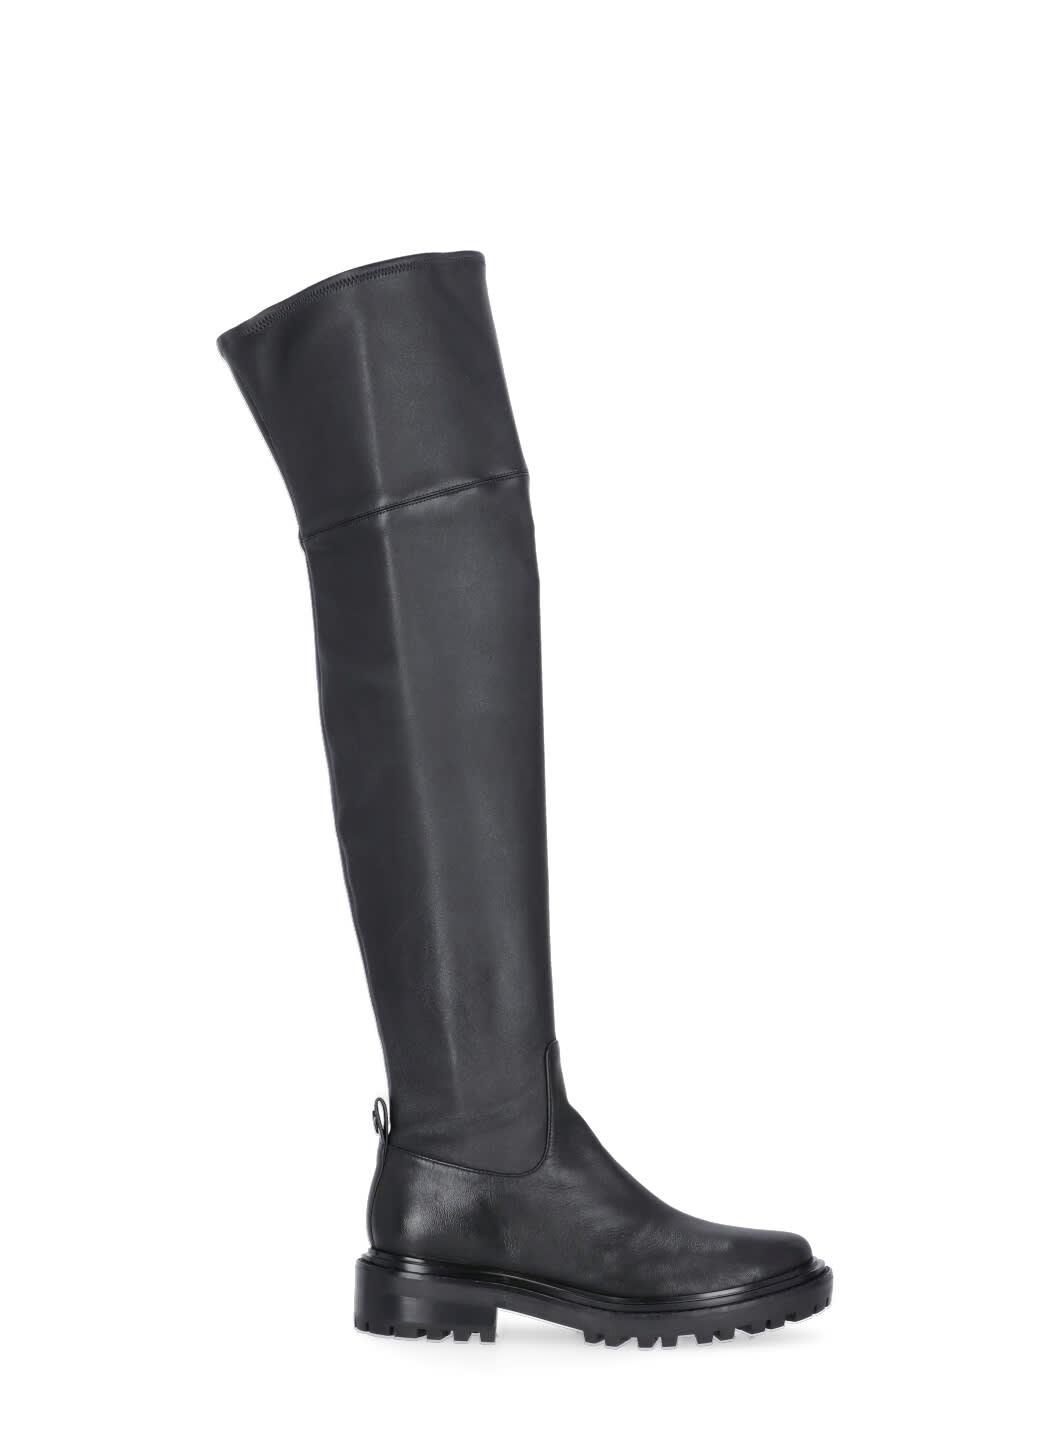 Tory Burch Utility Over The Knee Leather Boots in Black | Lyst